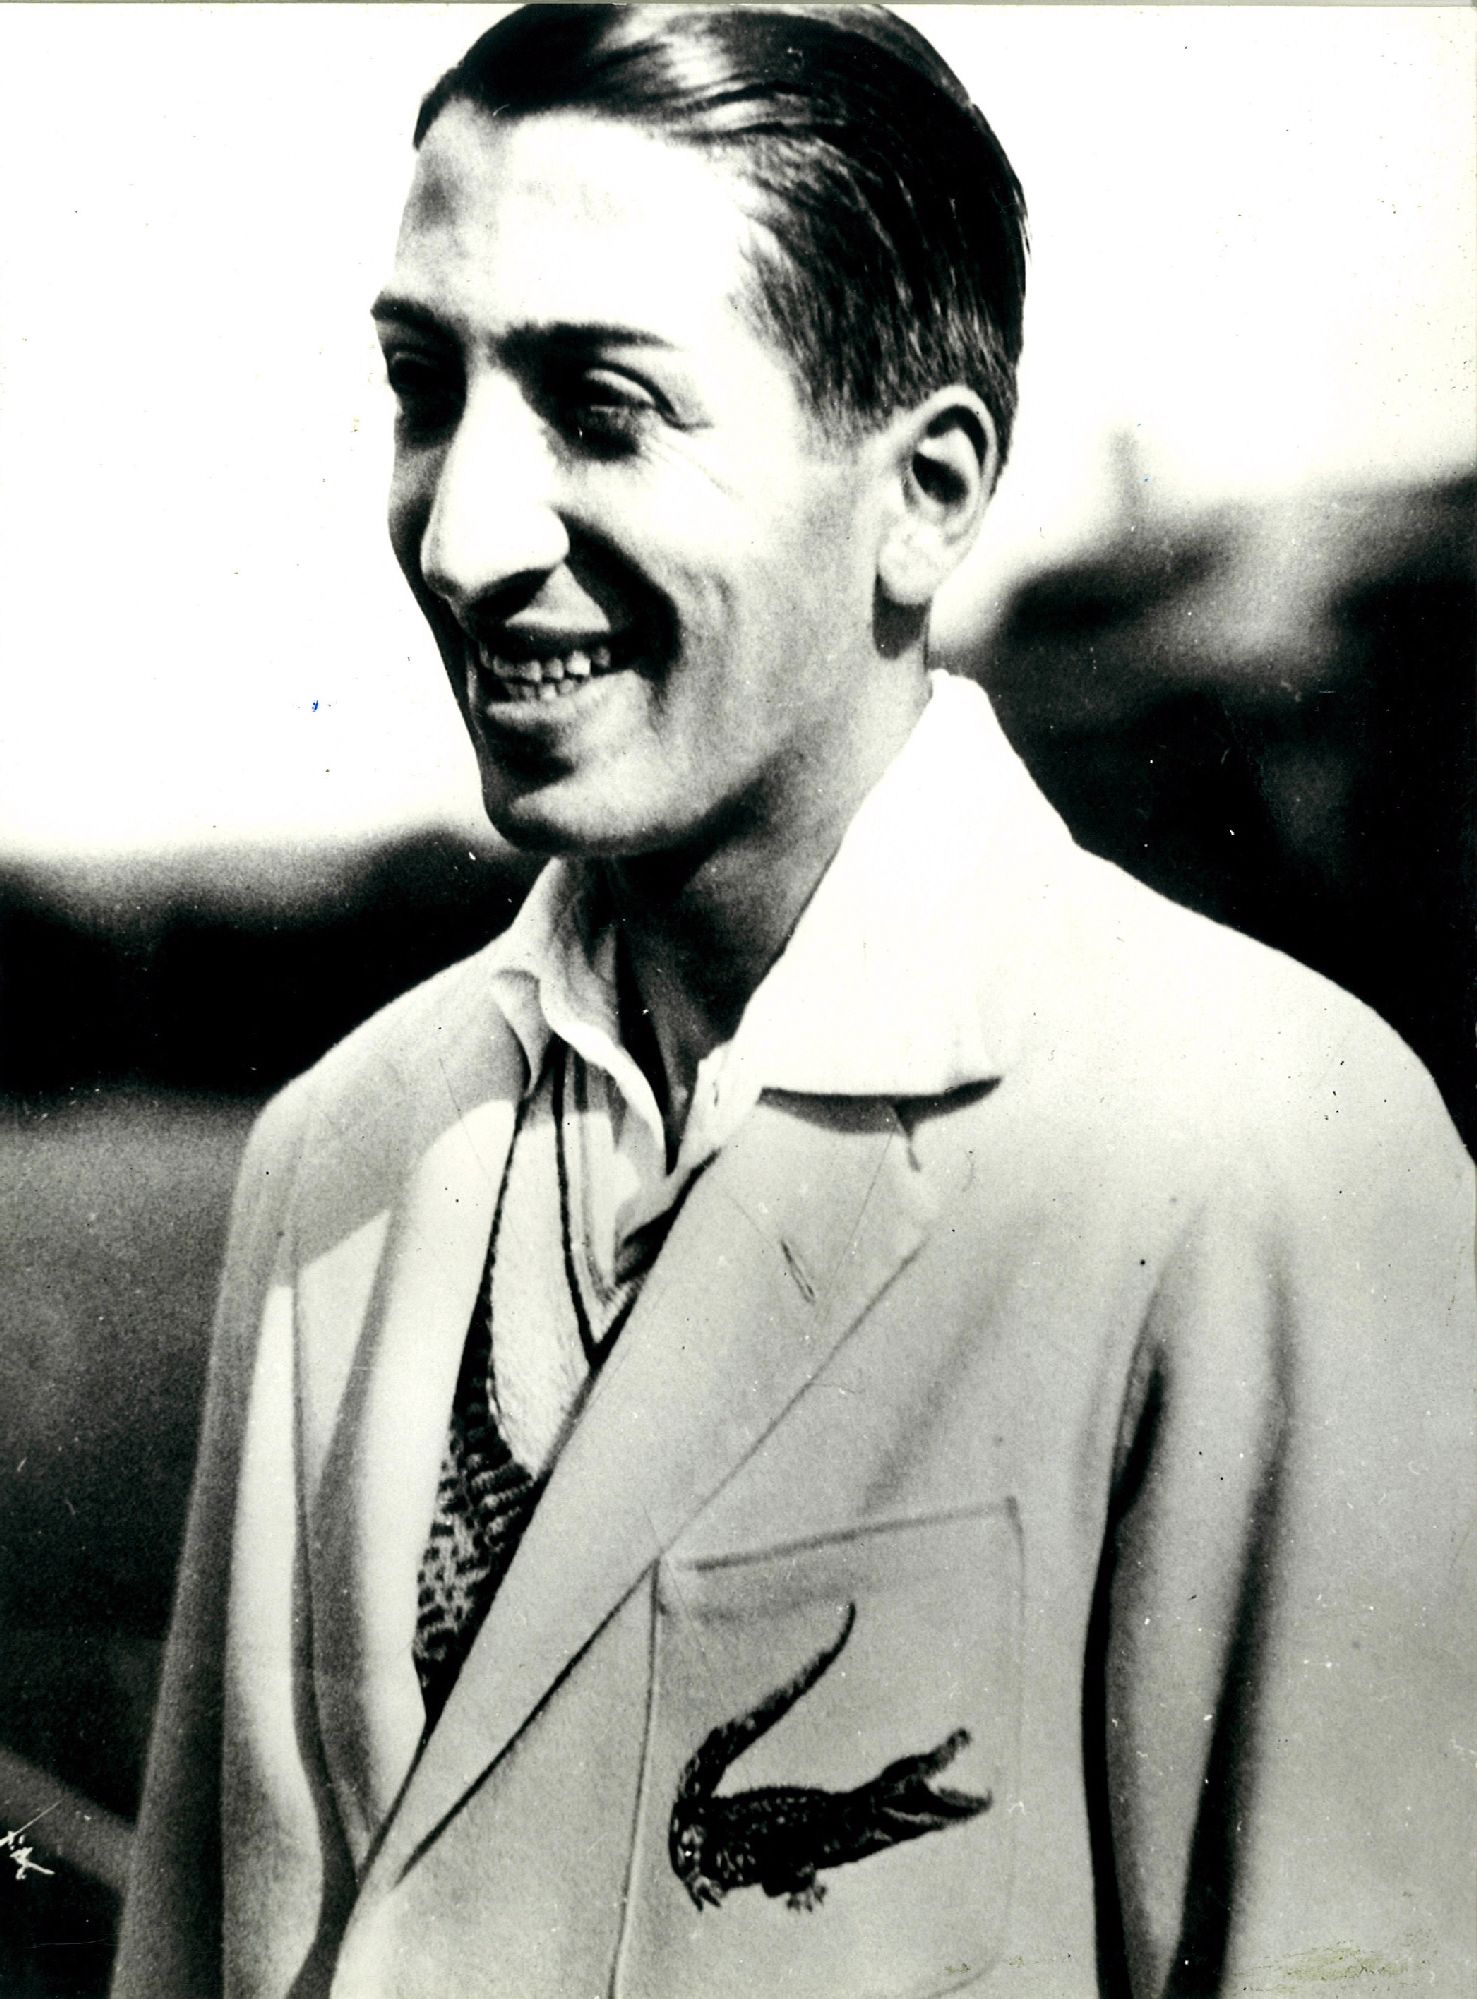 Rene Lacoste Biography And History